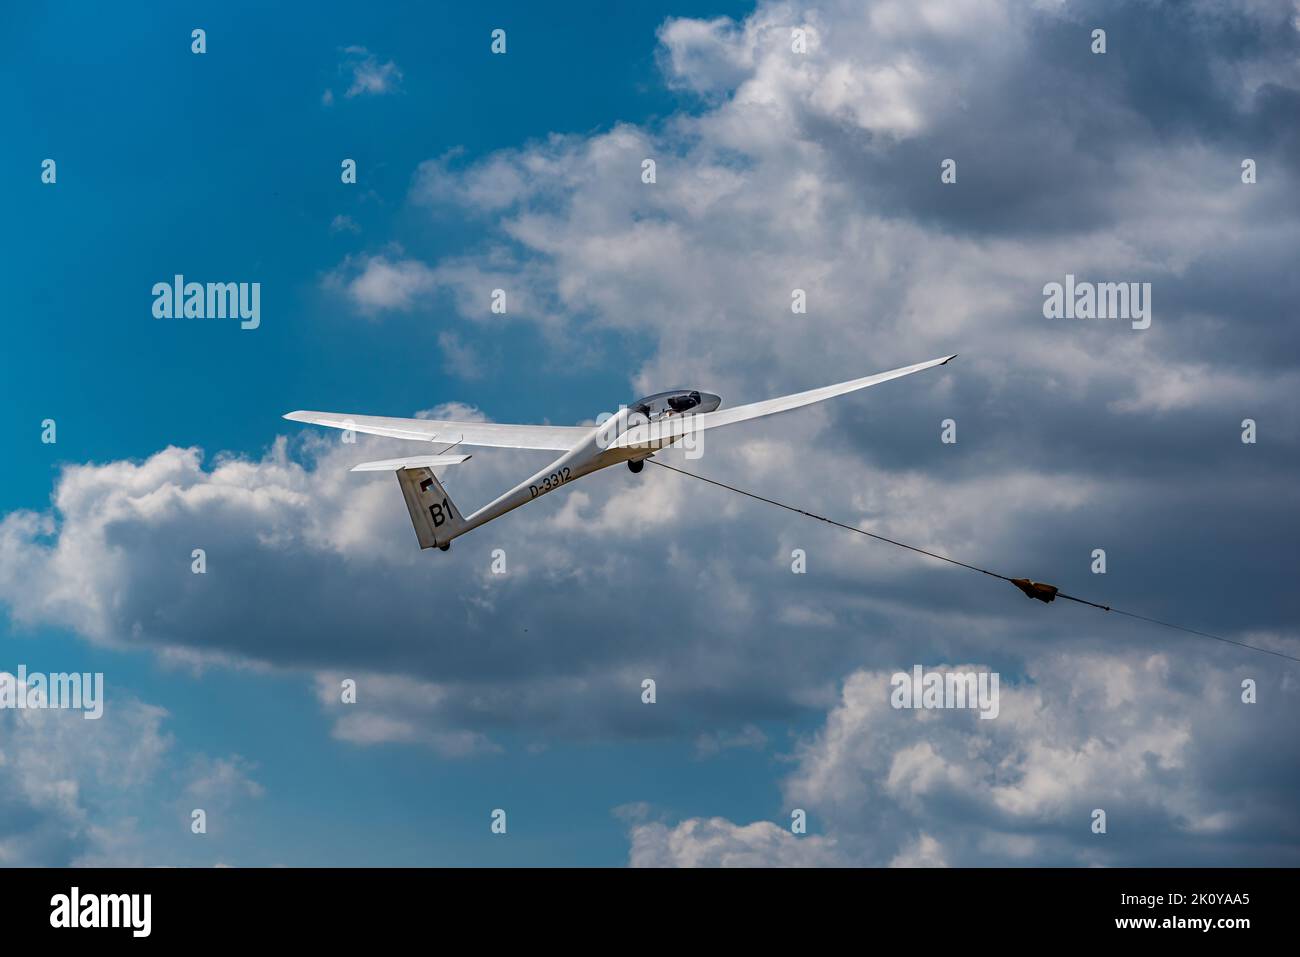 Hamburg, Germany - 08 21 2022:a glider still attached to the tow cable in the sky after take-off Stock Photo